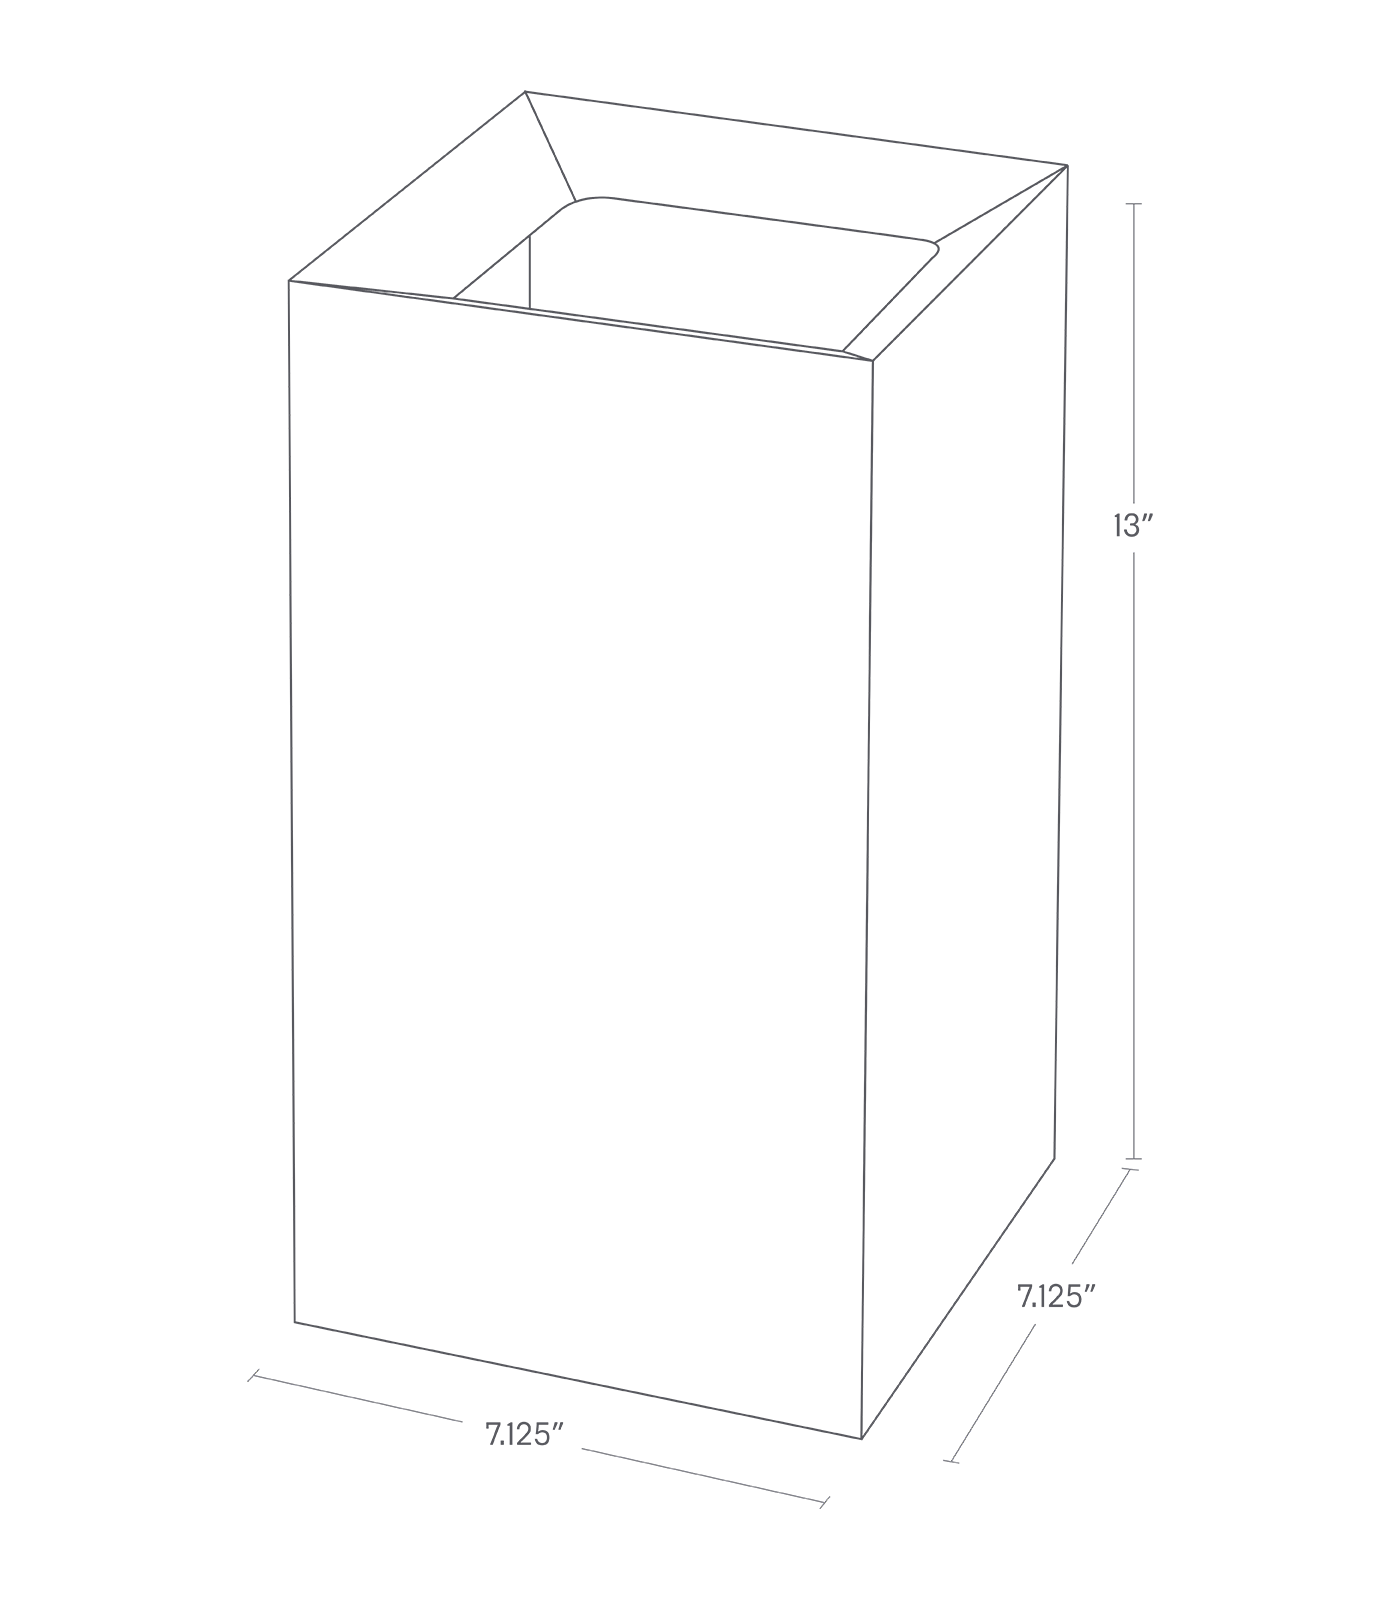 Dimension image for Trash Can on a white background including dimensions  L 7.09 x W 7.09 x H 12.99 inches